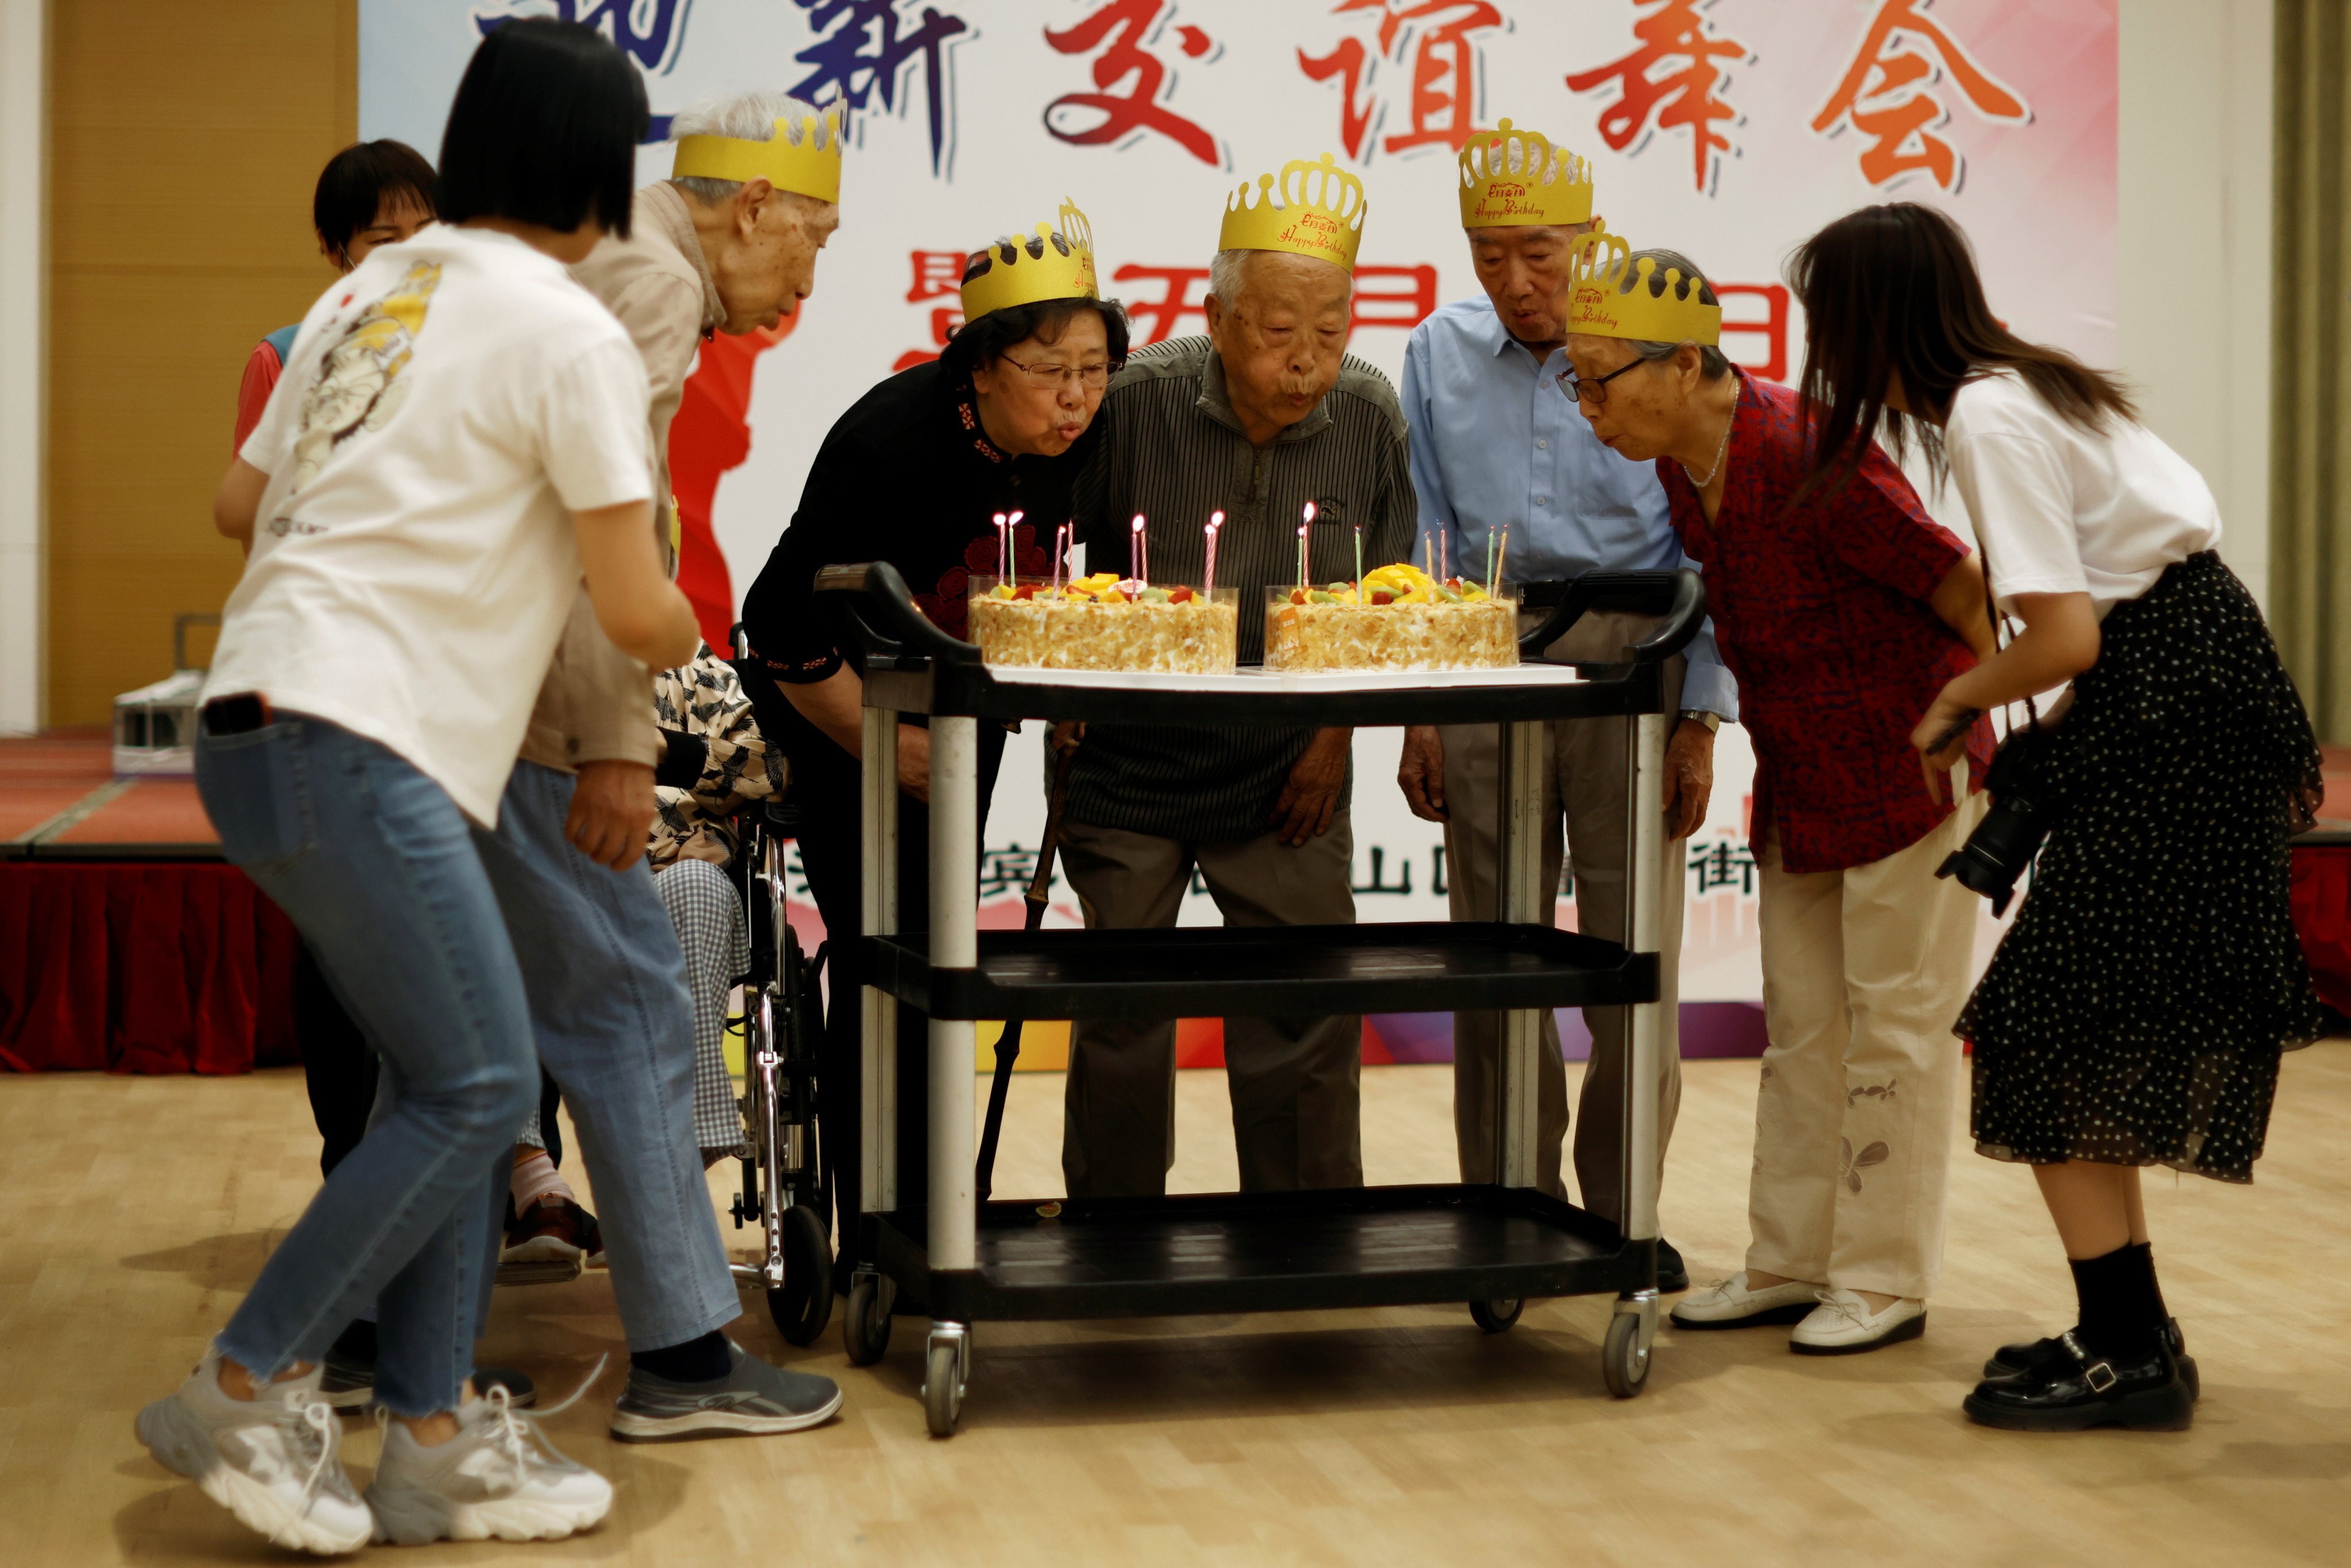 China’s population is ageing rapidly, with births falling and elderly people making up a growing proportion of the nation’s 1.4 billion people. Photo: Reuters